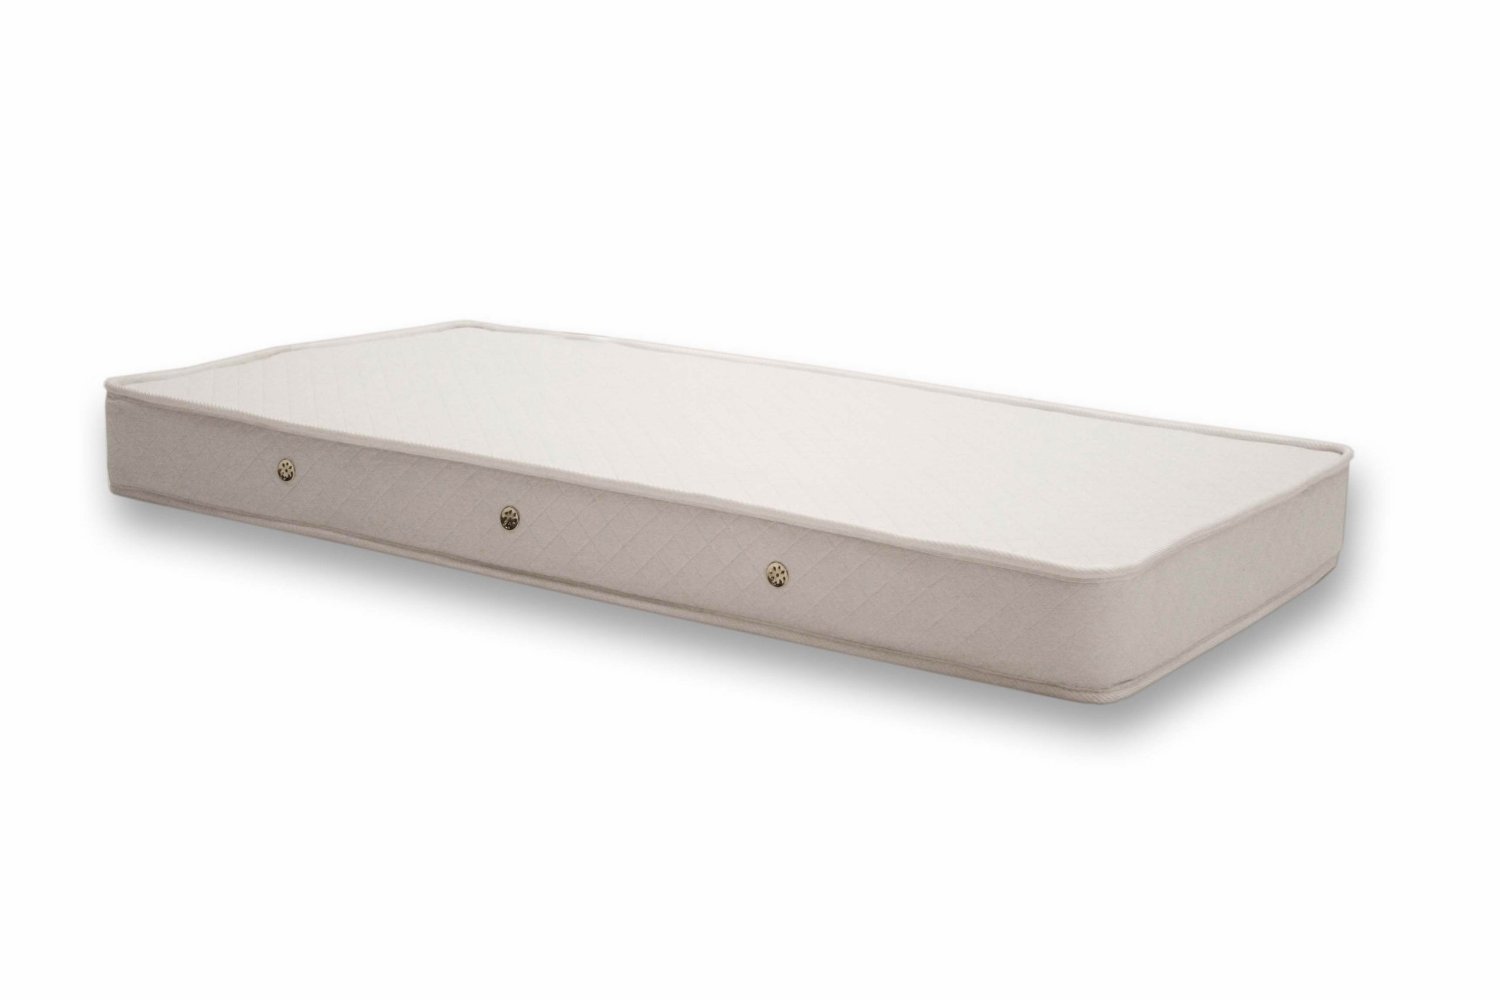 safety 1st baby mattress reviews